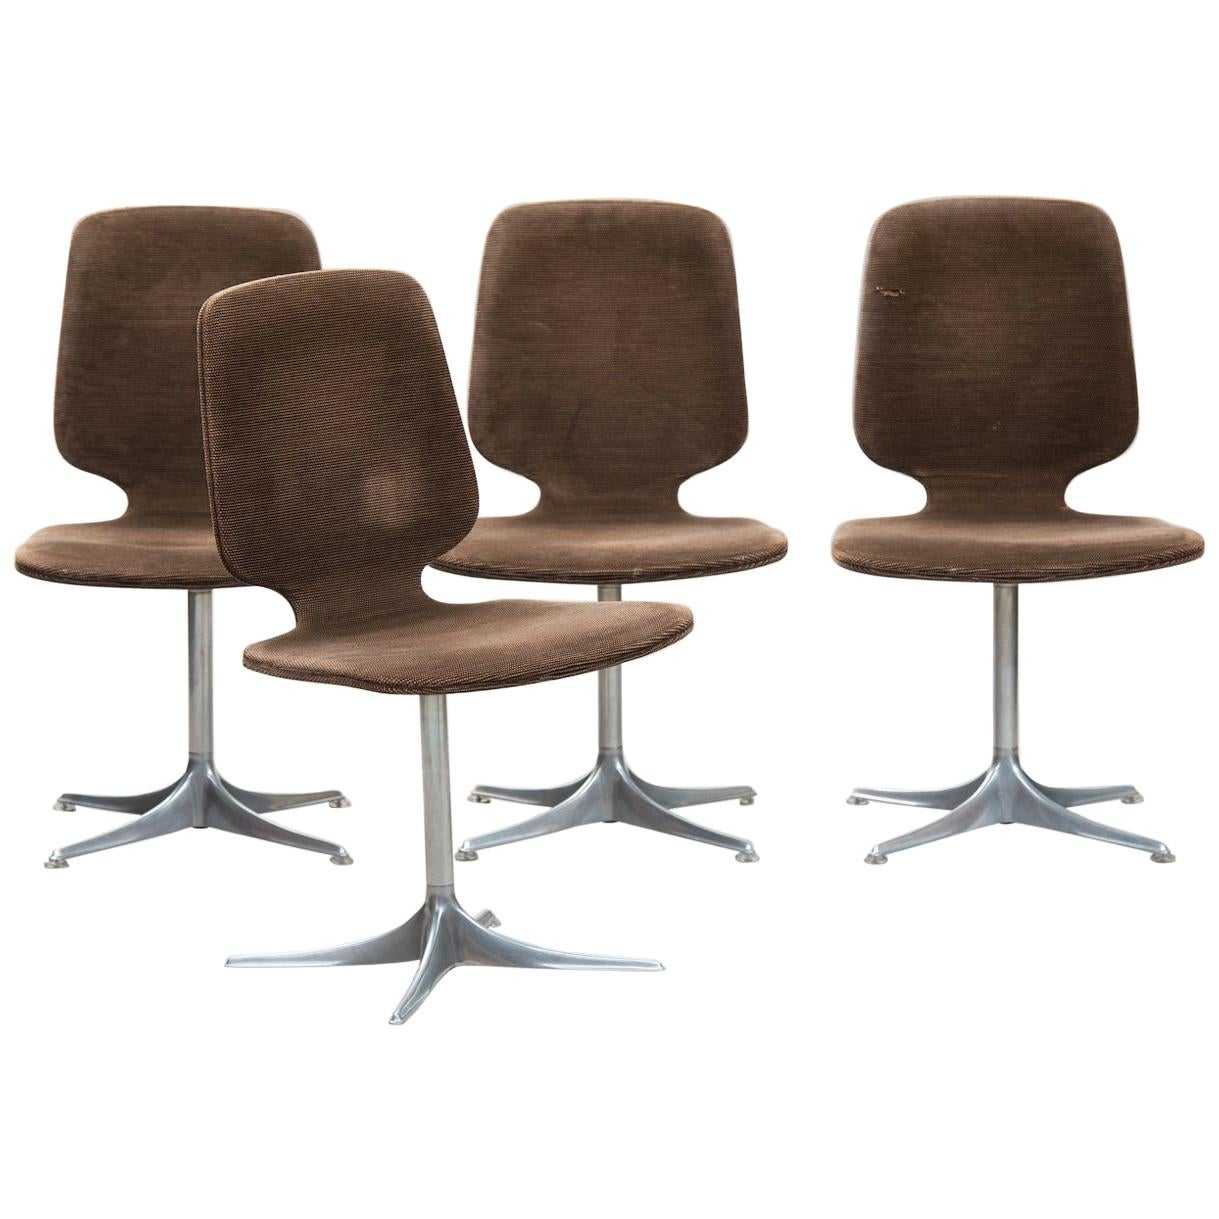 Horst Brüning 'Sedia' Model Dining Chairs for COR